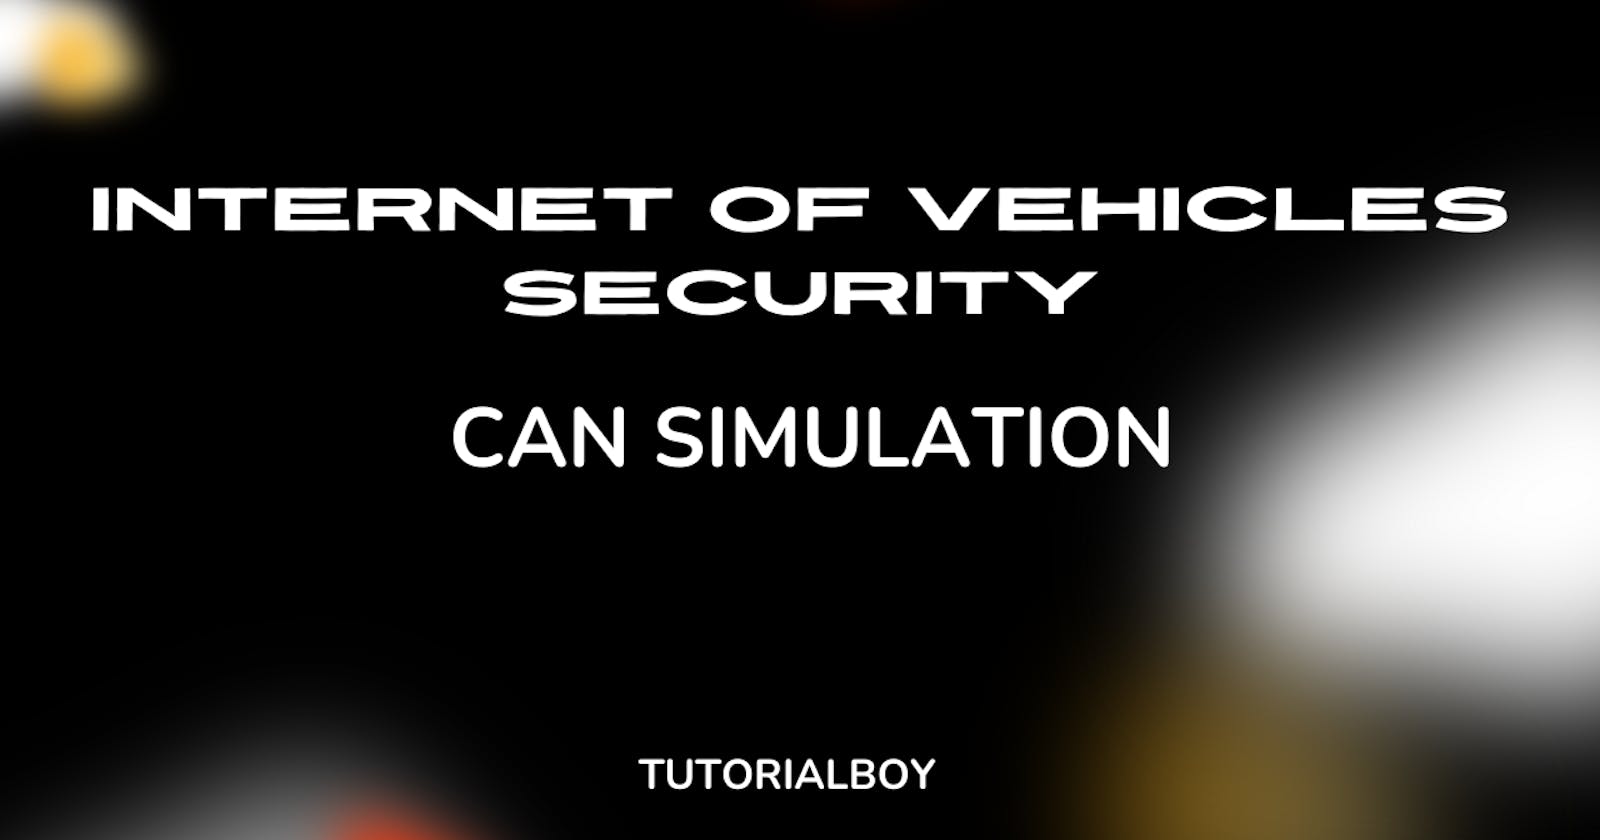 Getting Started with the Internet of Vehicles Security - CAN Simulation